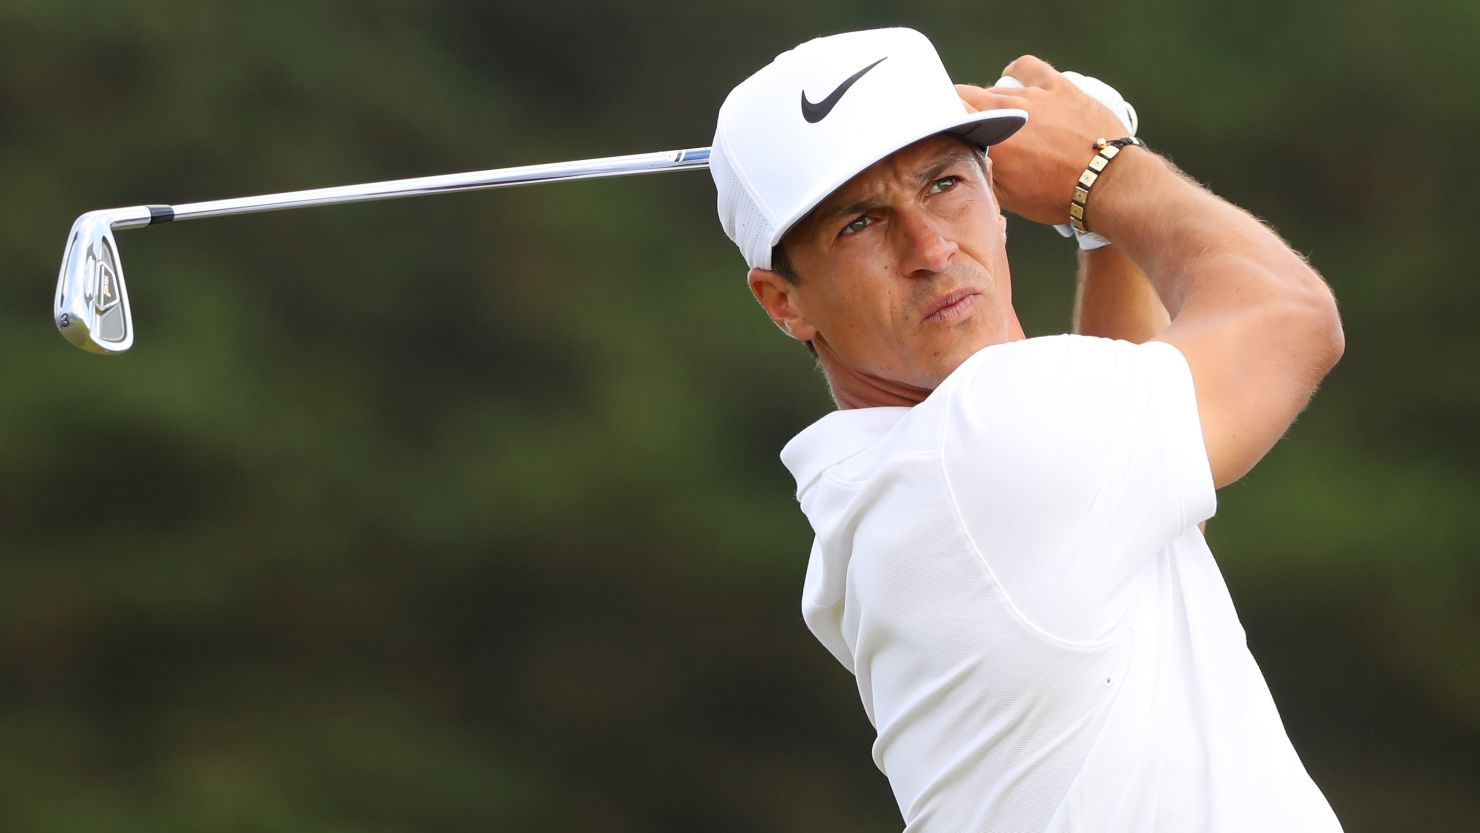 Thorbjorn Olesen denies three charges including sexual assault. 